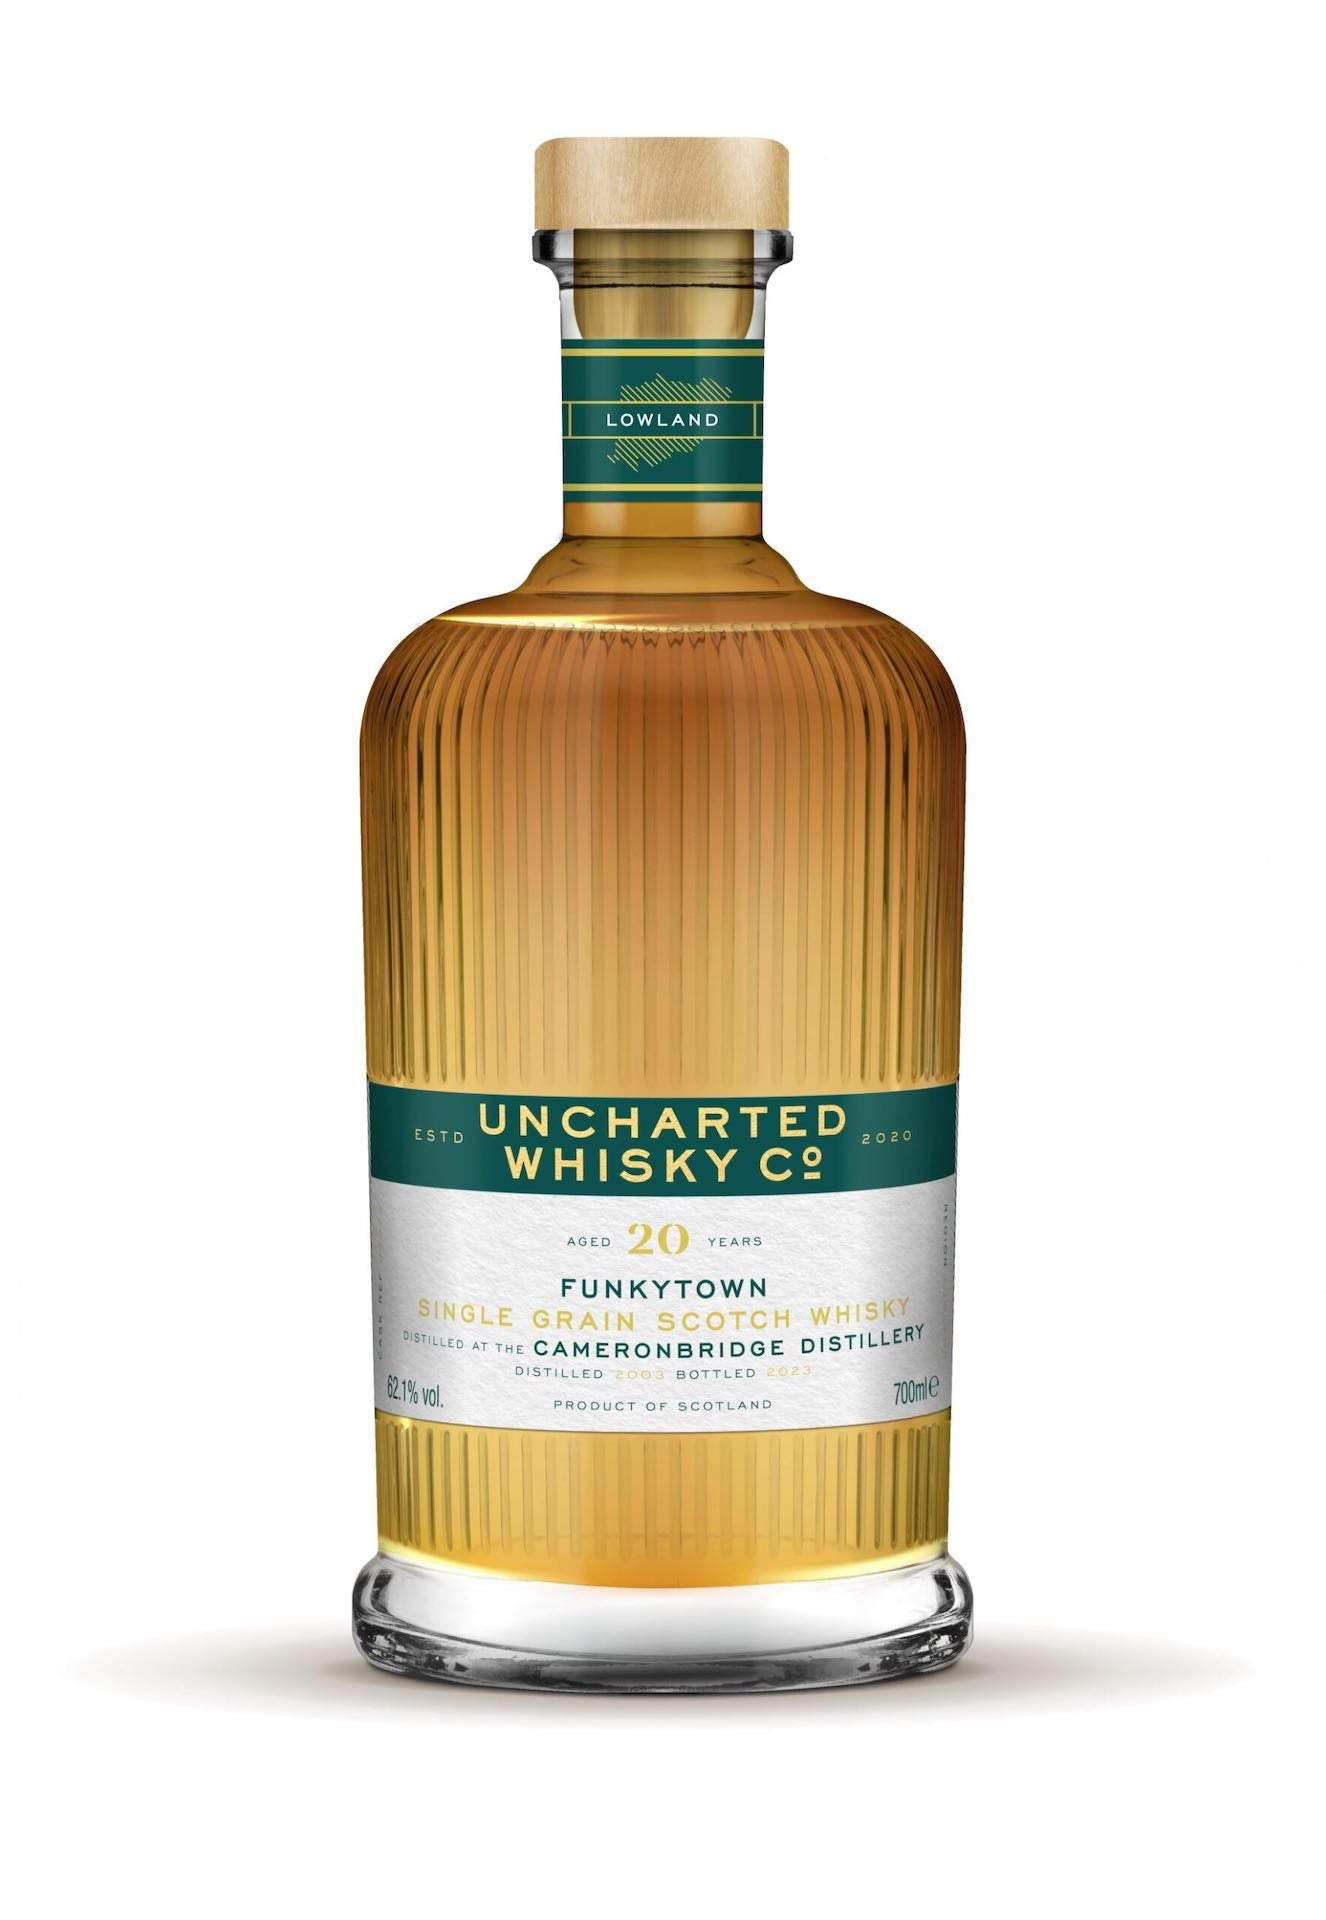 Uncharted Whisky, Funkytown, Cameronbridge 20 Year Old